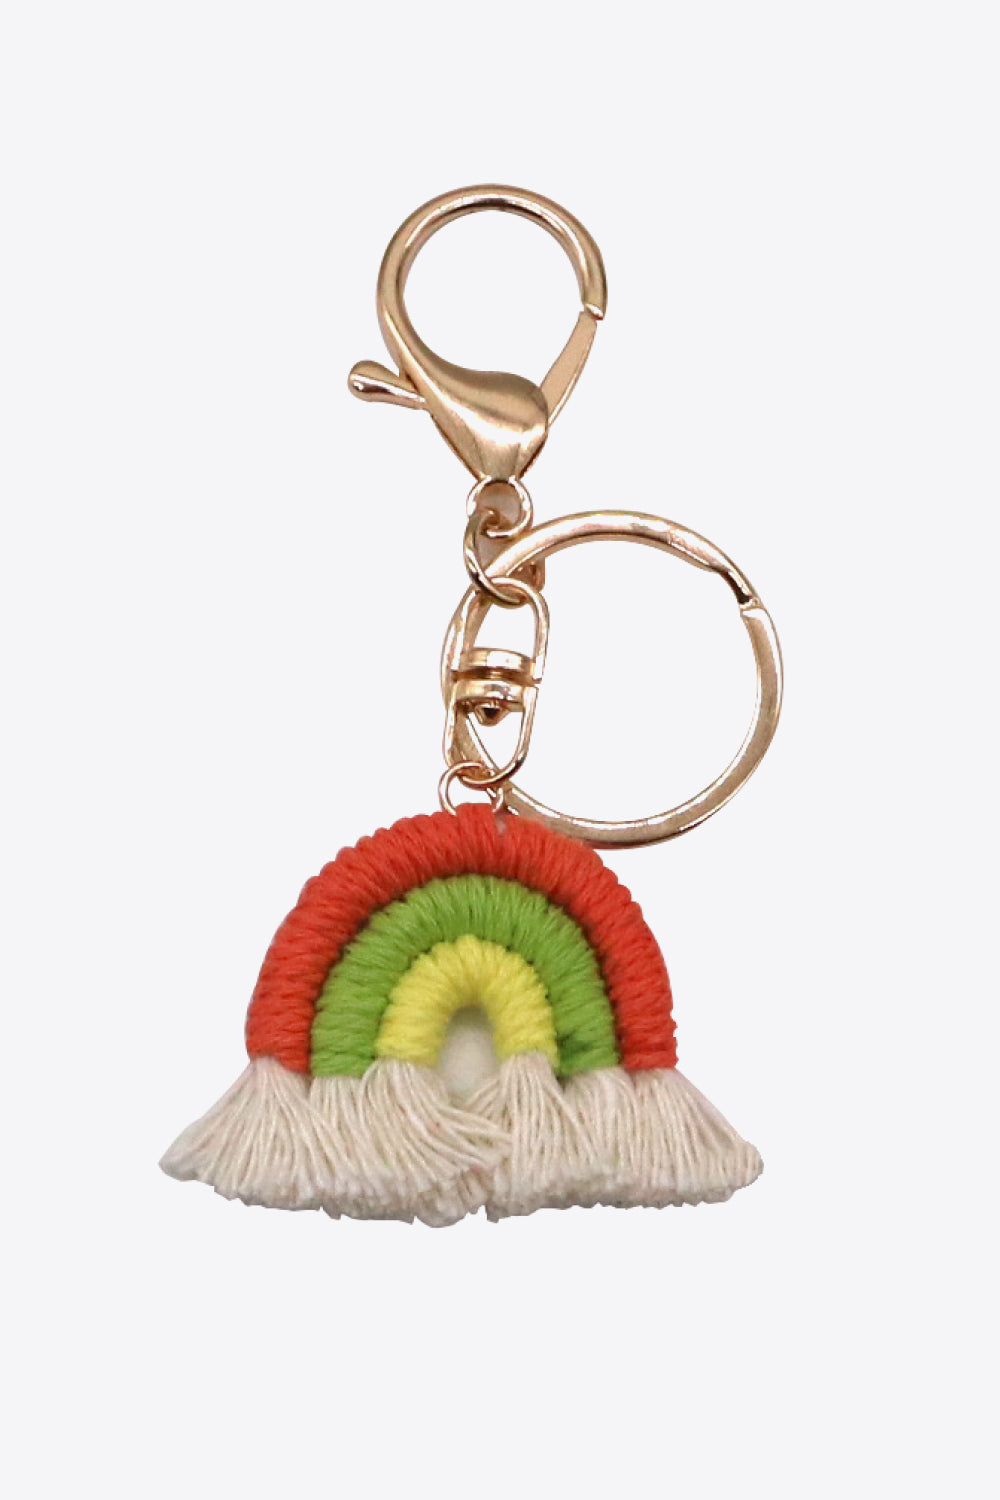 Trendsi Cupid Beauty Supplies Red/Green/Yellow / One Size Keychains Assorted 4-Pack Rainbow Fringe Keychain